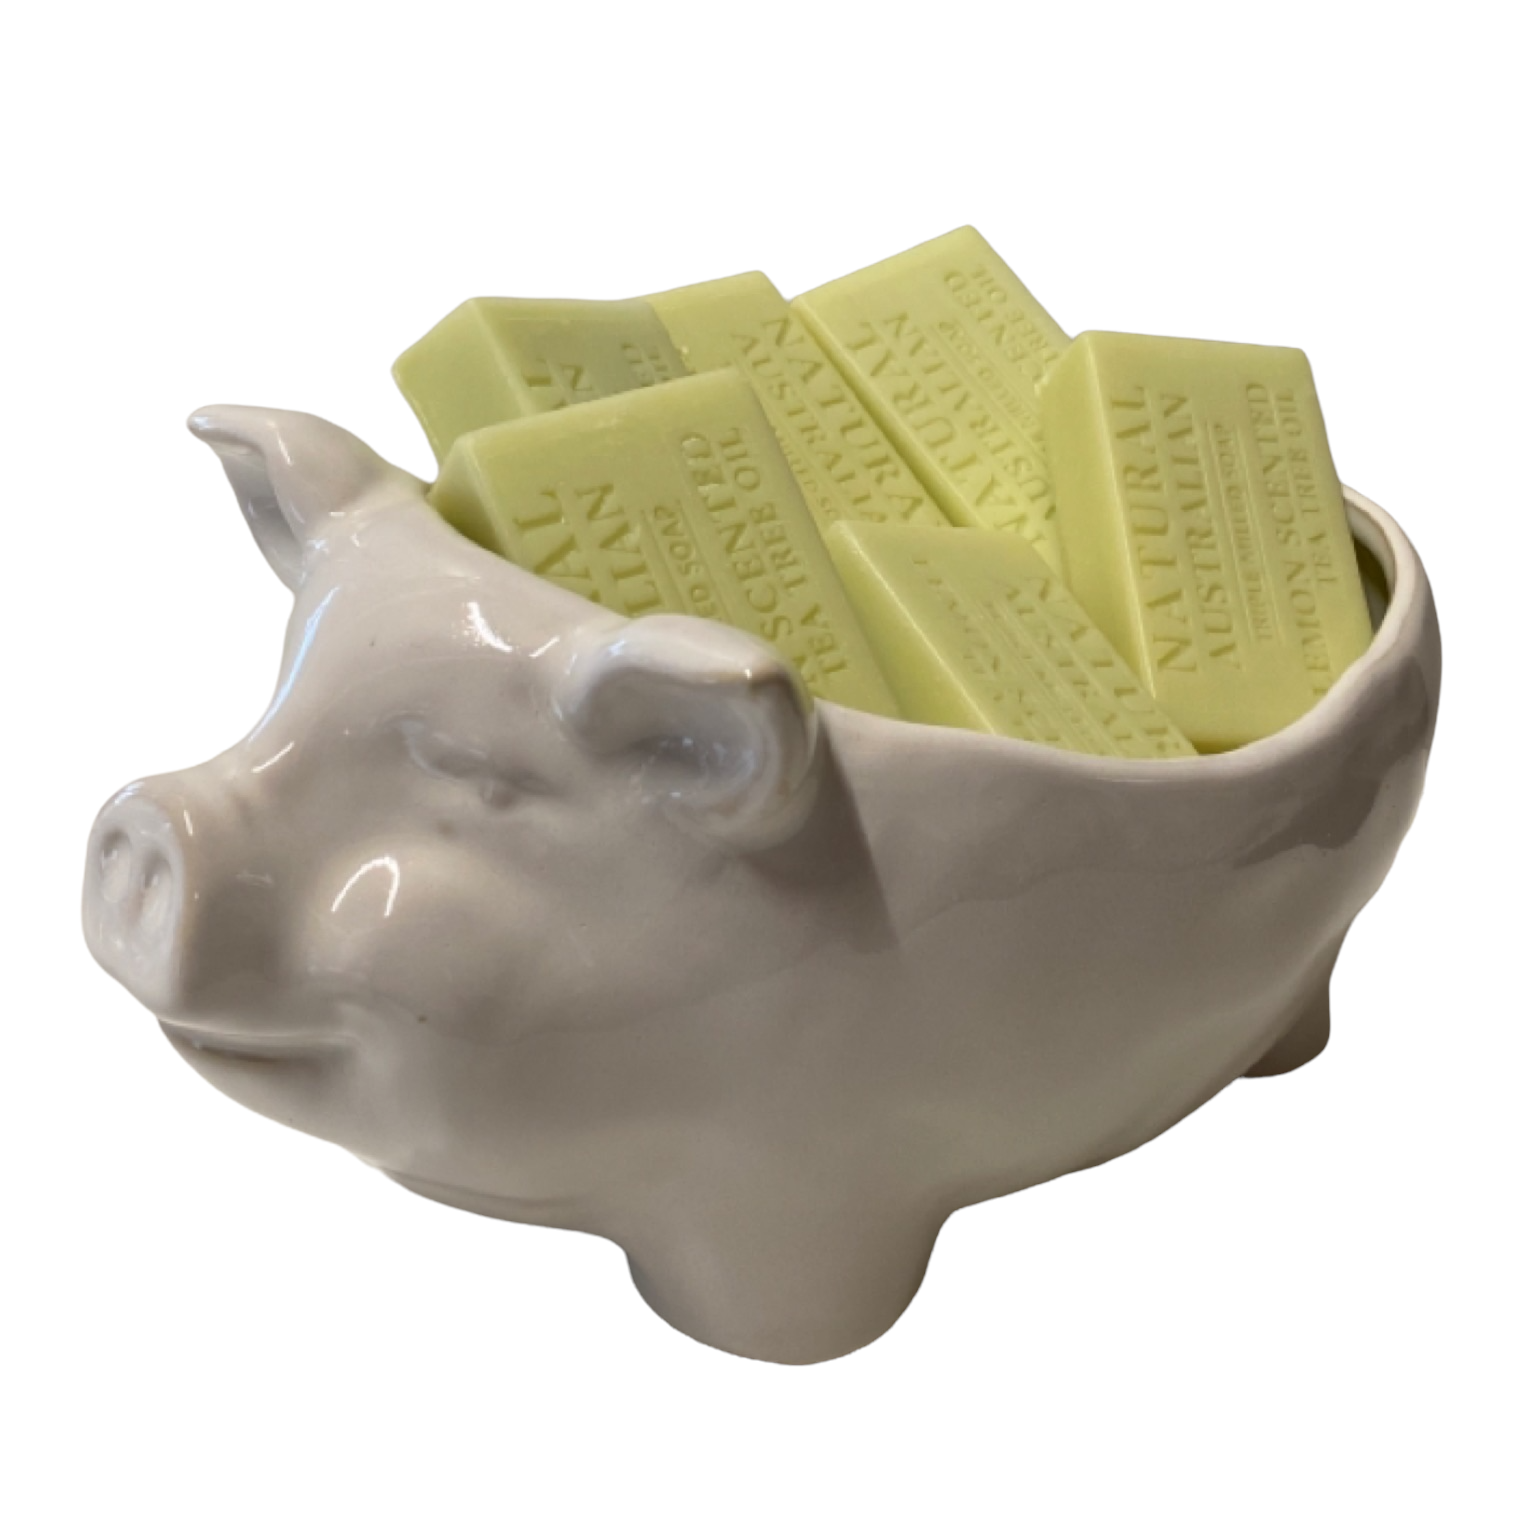 Pig Farmhouse Lemon Scented Soap Bathroom - The Renmy Store Homewares & Gifts 